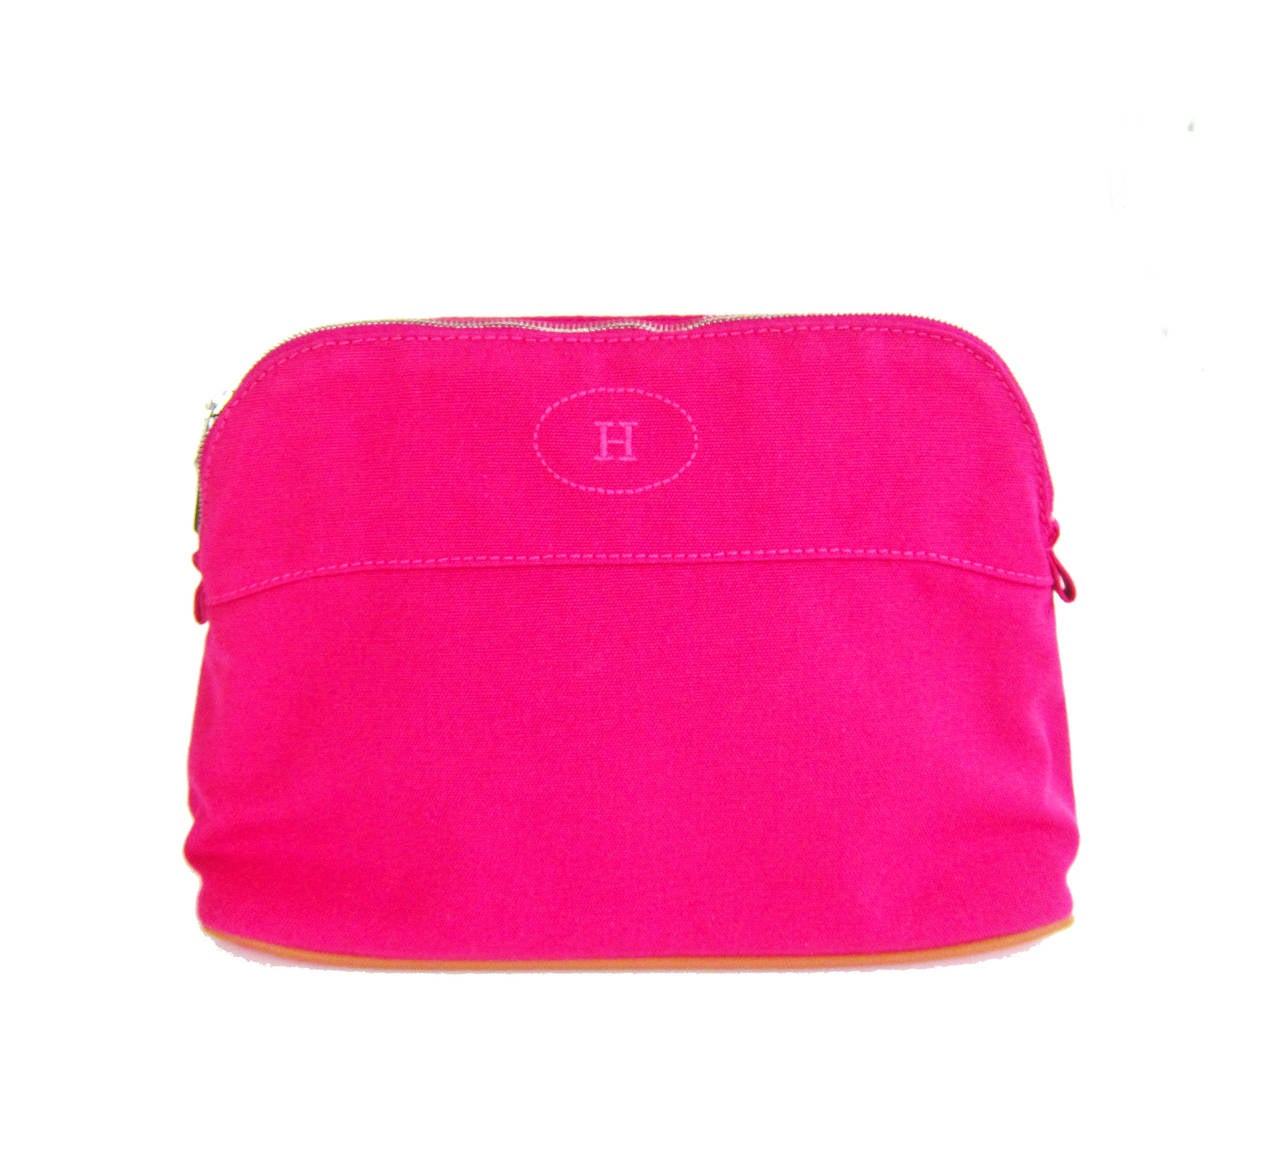 Hermes Fuchsia Bolide Toiletry Beach and Travel Case MM 2